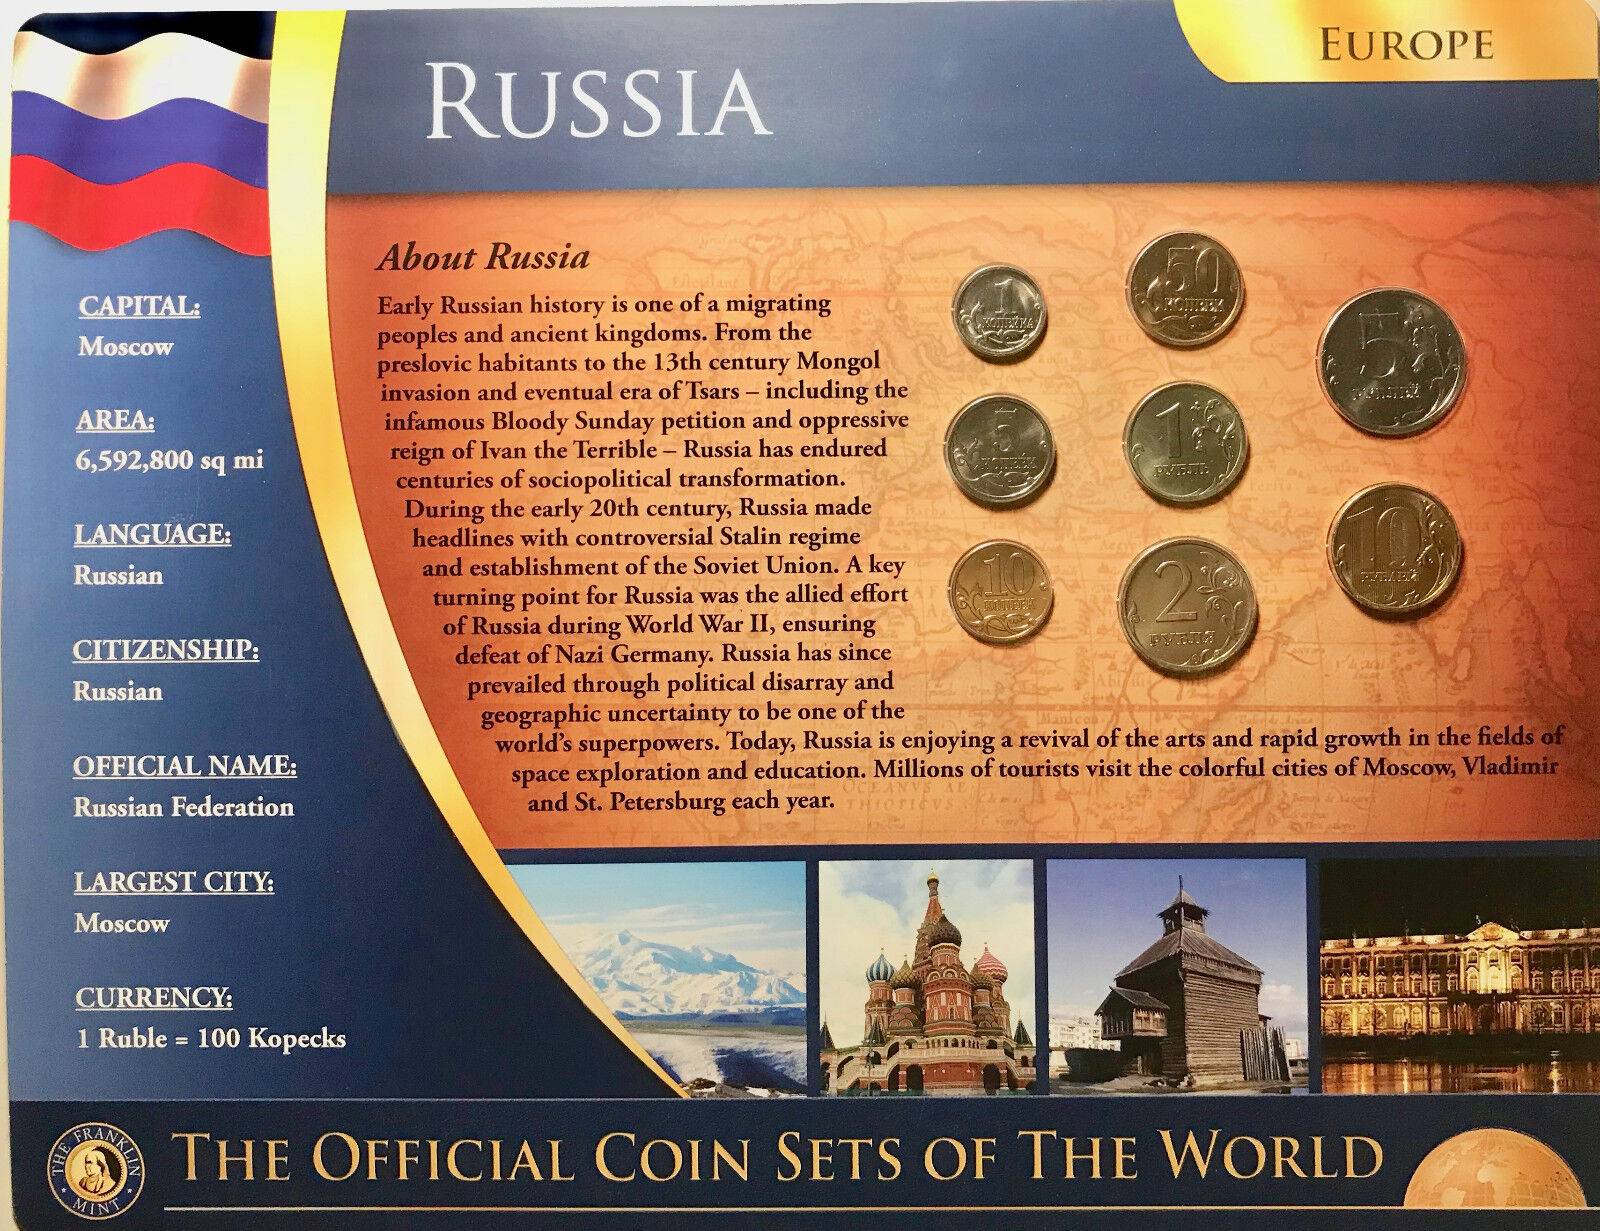 THE OFFICIAL COIN SETS OF THE WORLD BY THE FRANKLIN MINT 